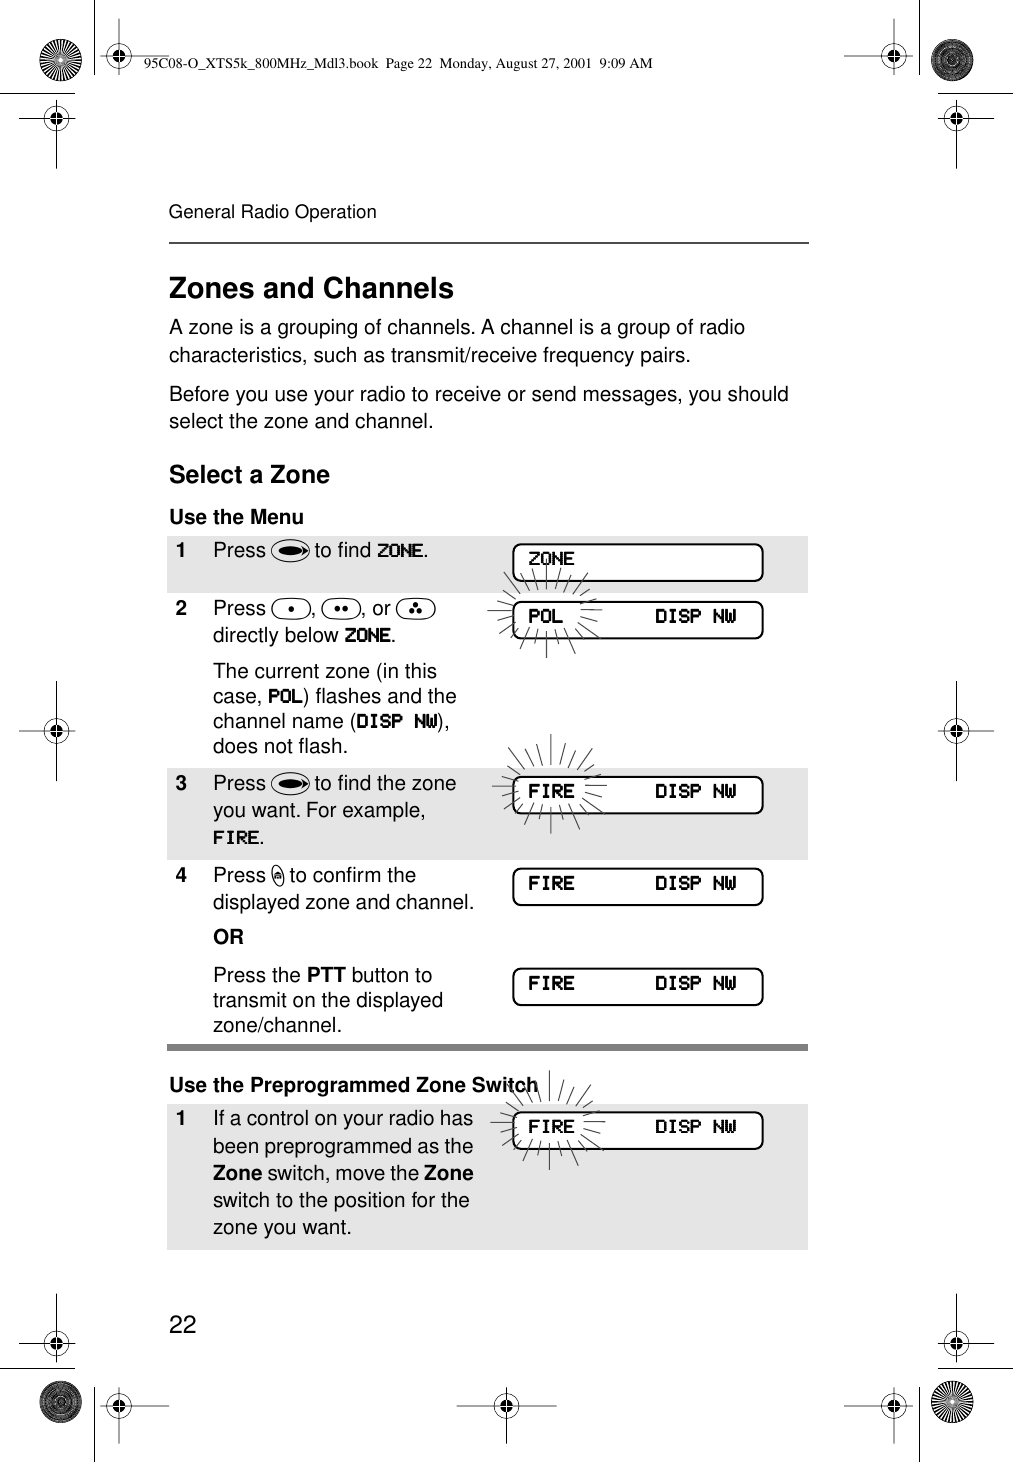 22General Radio OperationZones and ChannelsA zone is a grouping of channels. A channel is a group of radio characteristics, such as transmit/receive frequency pairs. Before you use your radio to receive or send messages, you should select the zone and channel.Select a ZoneUse the Menu Use the Preprogrammed Zone Switch1Press U to ﬁnd ZZZZOOOONNNNEEEE.2Press D, E, or F directly below ZZZZOOOONNNNEEEE.The current zone (in this case, PPPPOOOOLLLL) ﬂashes and the channel name (DDDDIIIISSSSPPPP    NNNNWWWW), does not ﬂash.3Press U to ﬁnd the zone you want. For example, FFFFIIIIRRRREEEE.4Press h to conﬁrm the displayed zone and channel. ORPress the PTT button to transmit on the displayed zone/channel.1If a control on your radio has been preprogrammed as the Zone switch, move the Zone switch to the position for the zone you want. ZZZZOOOONNNNEEEEPPPPOOOOLLLL                                DDDDIIIISSSSPPPP    NNNNWWWWFFFFIIIIRRRREEEE                            DDDDIIIISSSSPPPP    NNNNWWWWFFFFIIIIRRRREEEE                            DDDDIIIISSSSPPPP    NNNNWWWWFFFFIIIIRRRREEEE                            DDDDIIIISSSSPPPP    NNNNWWWWFFFFIIIIRRRREEEE                            DDDDIIIISSSSPPPP    NNNNWWWW95C08-O_XTS5k_800MHz_Mdl3.book  Page 22  Monday, August 27, 2001  9:09 AM